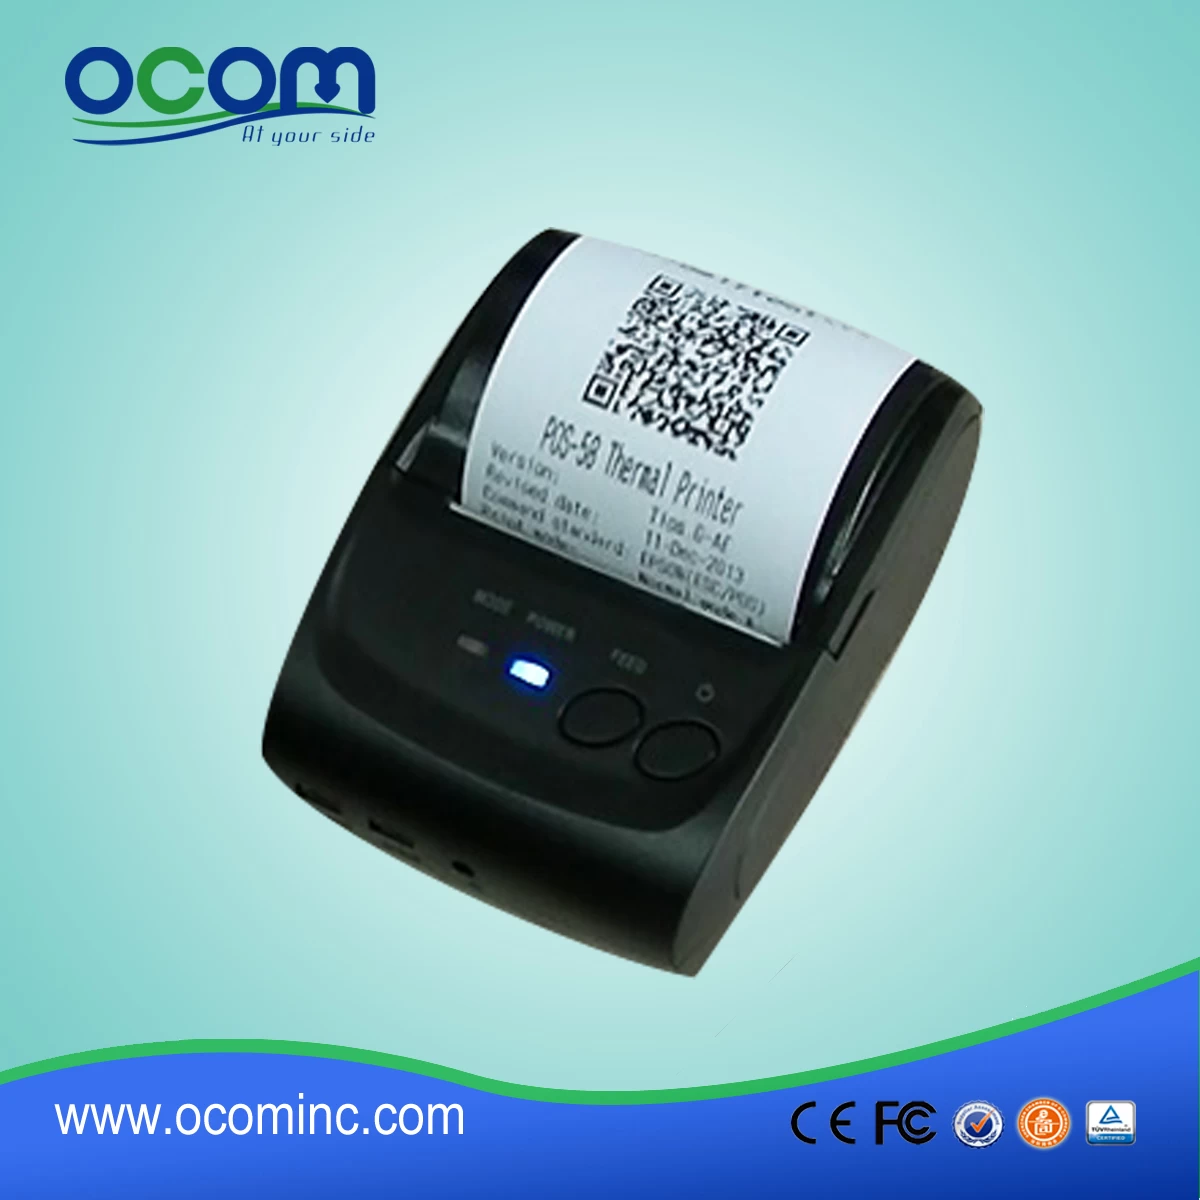 Battery Powered Thermal Bluetooth Mini Portable Printer compatible with Android